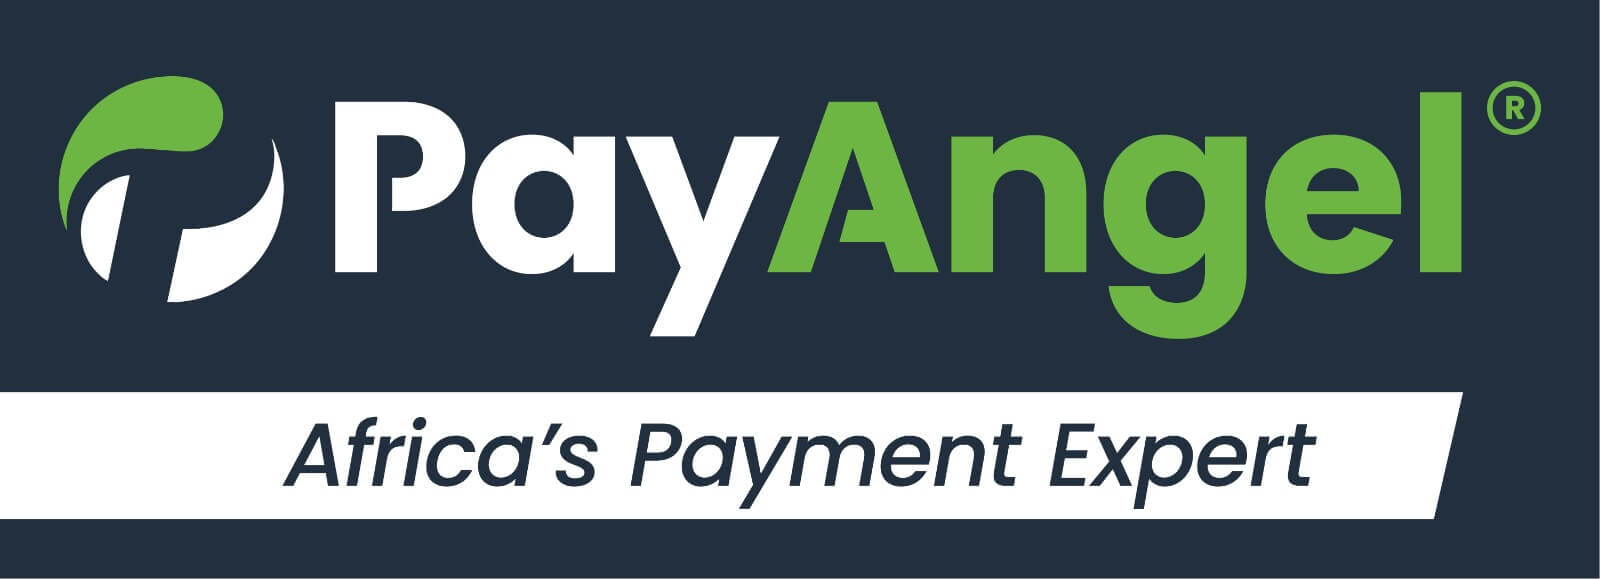 PayAngel - Send Money Online To Africa, Faster, And Cheaper 2021